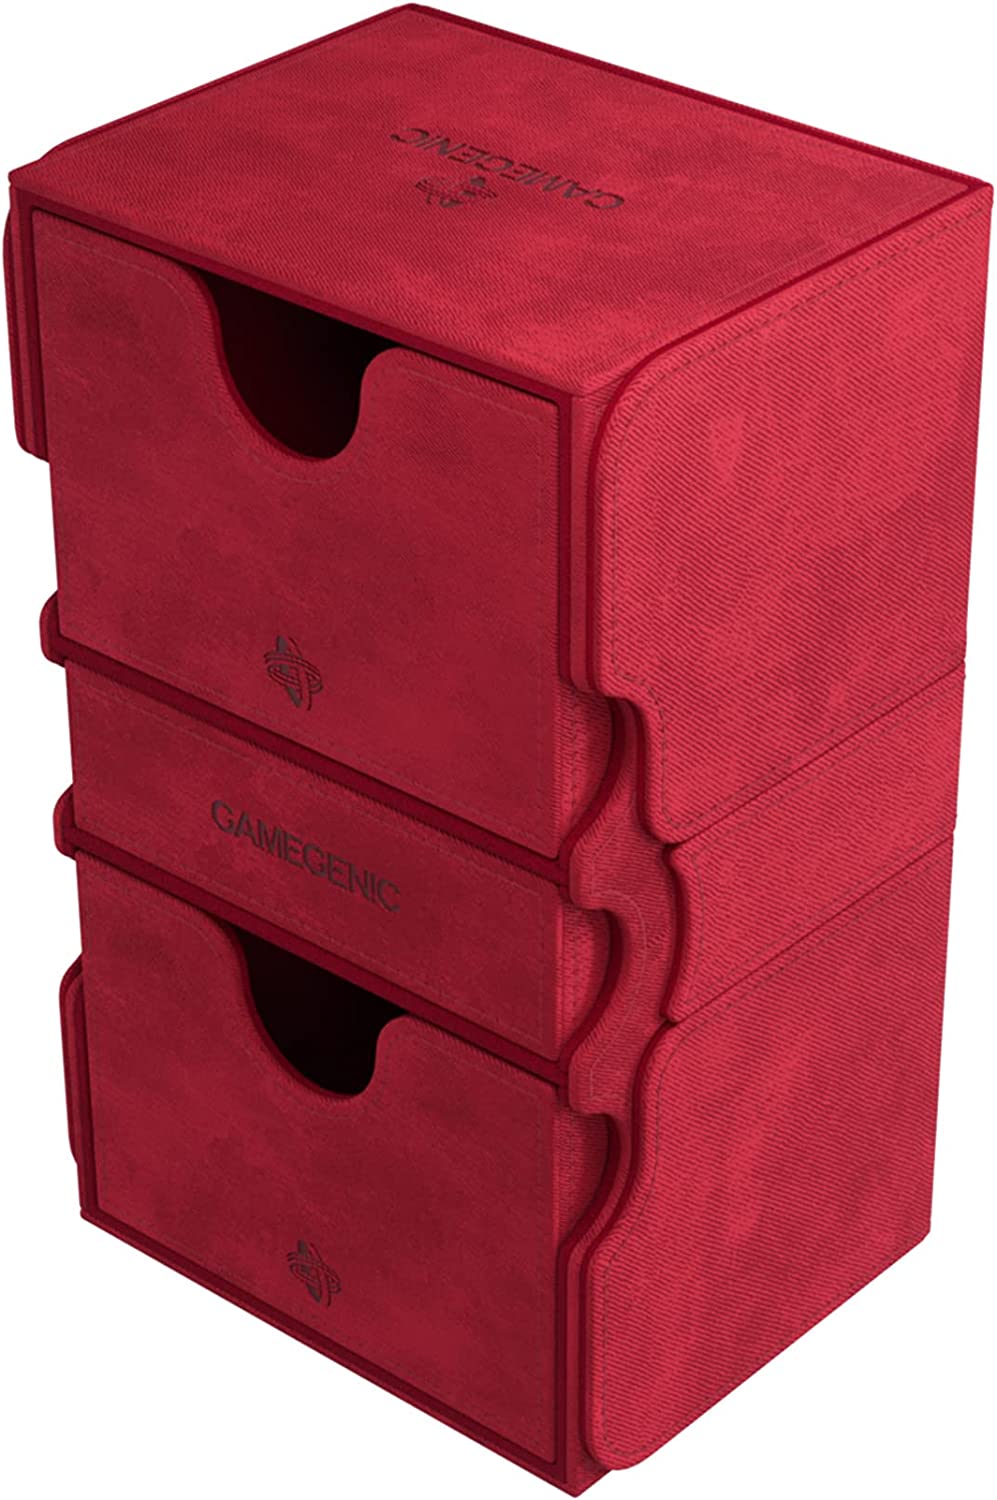 Stronghold 200+ XL Convertible Deck Box | Double-Sleeved Card Storage